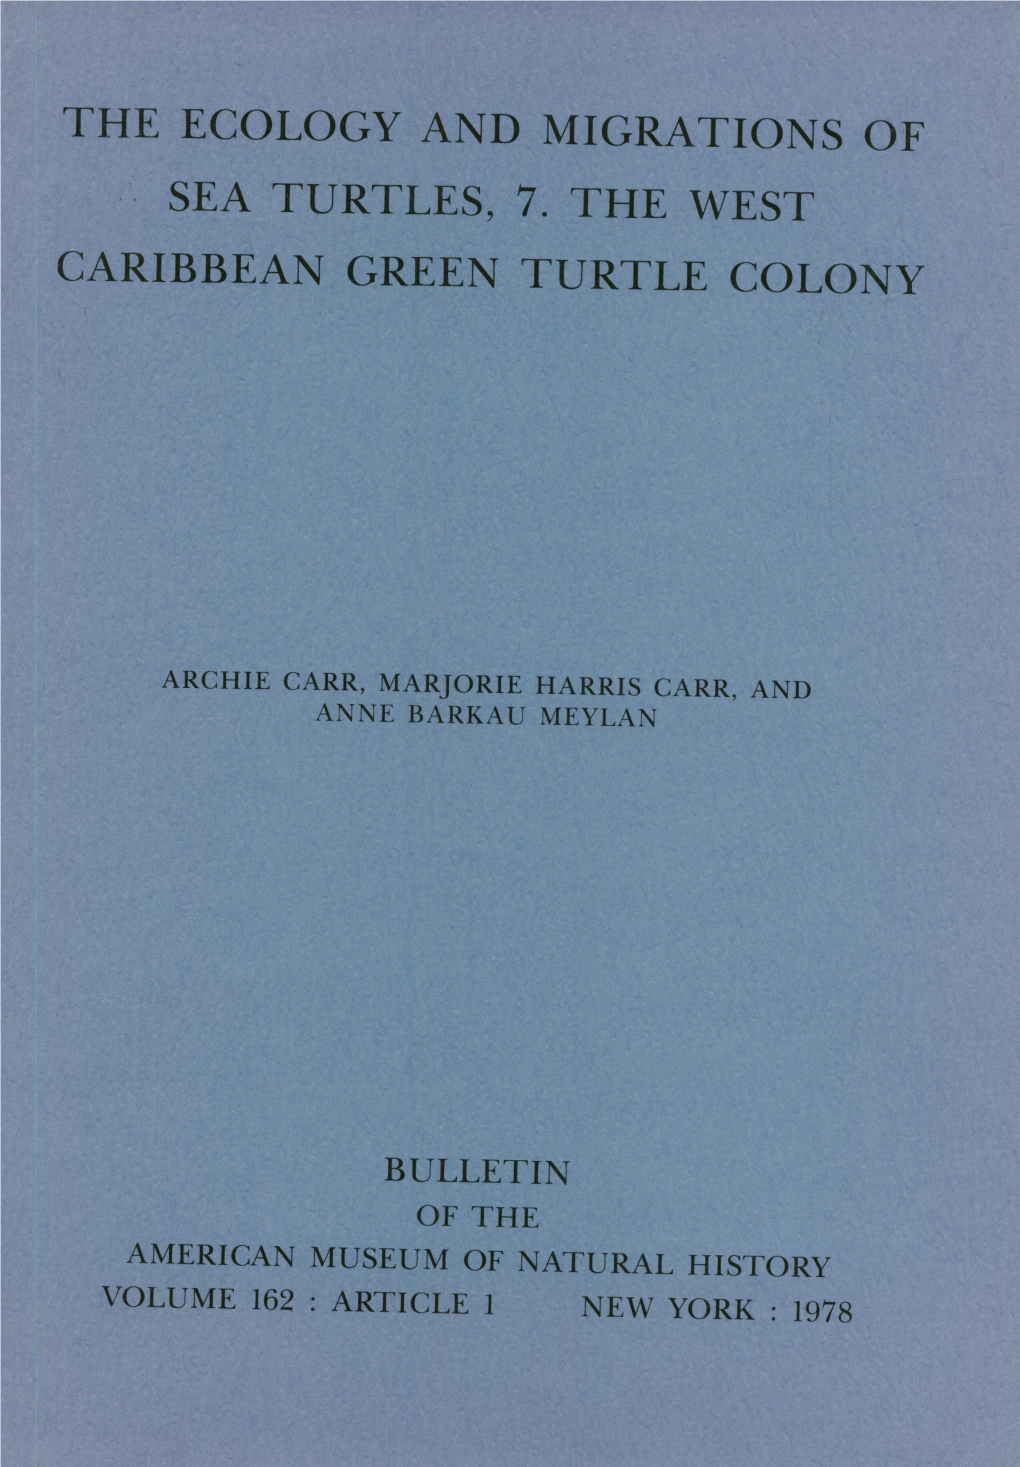 The Ecology and Migrations of Sea Turtles, 7